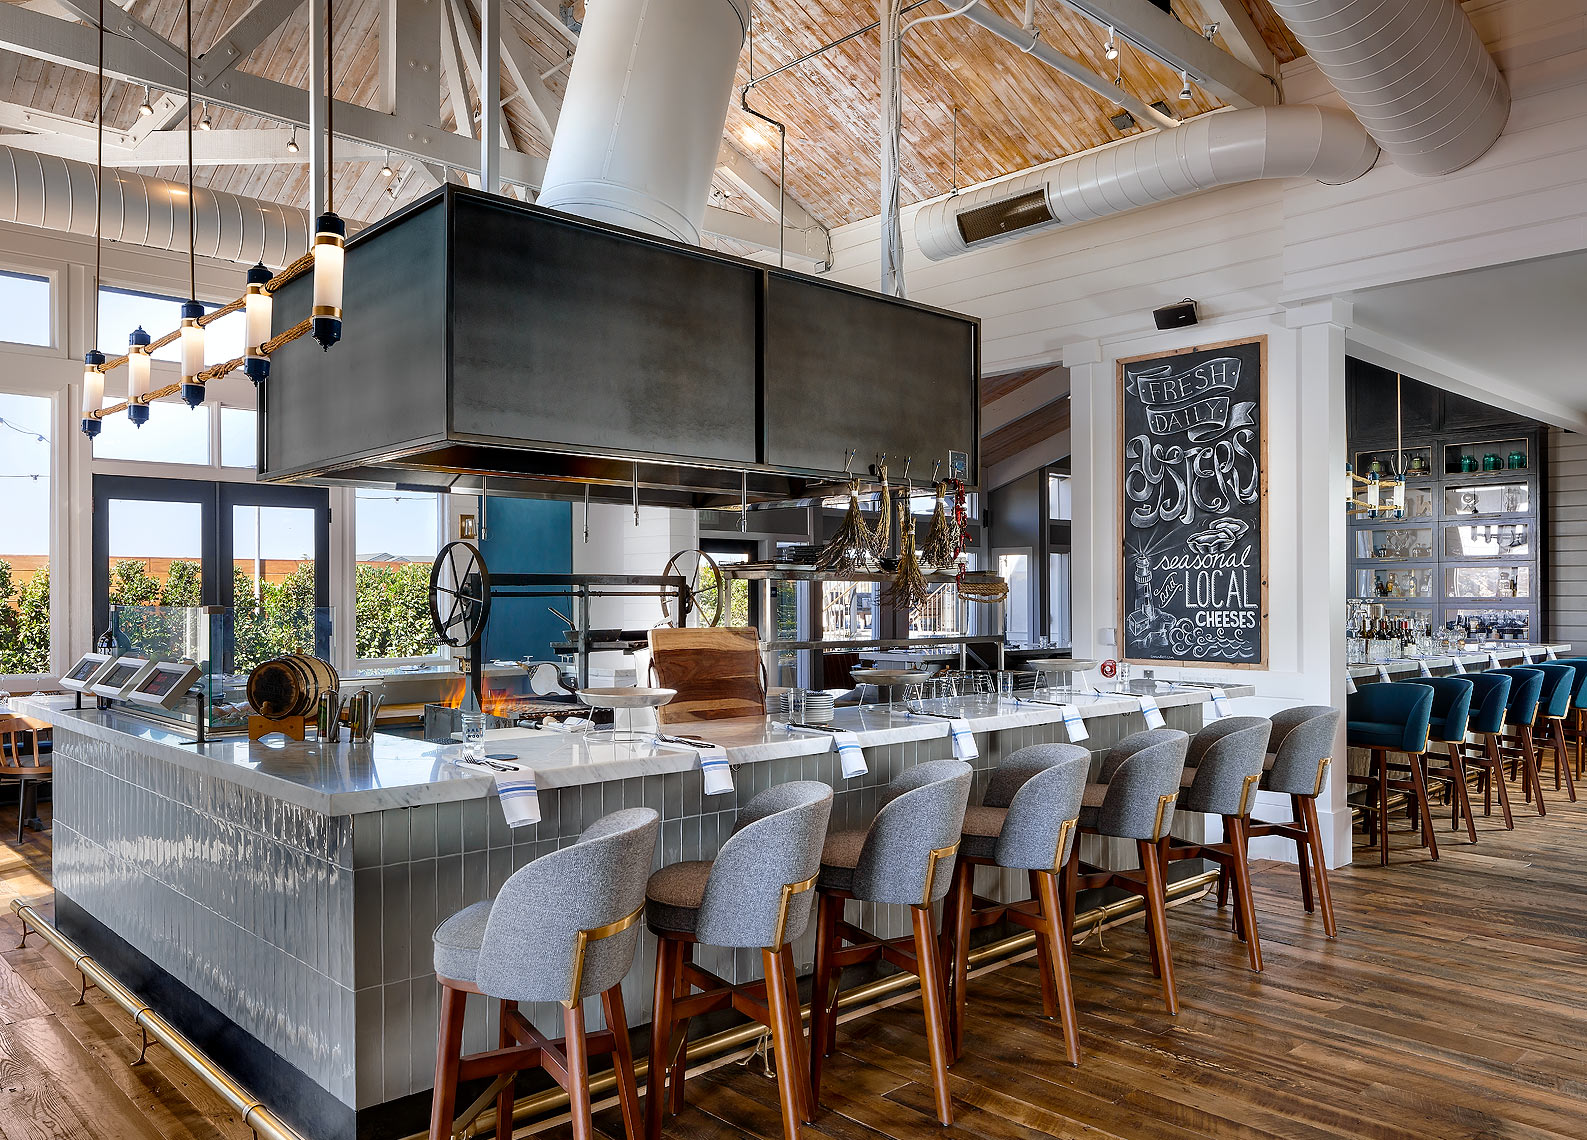 Saltwood Kitchen and Oysterette - Montery, California - Restaurant Photography